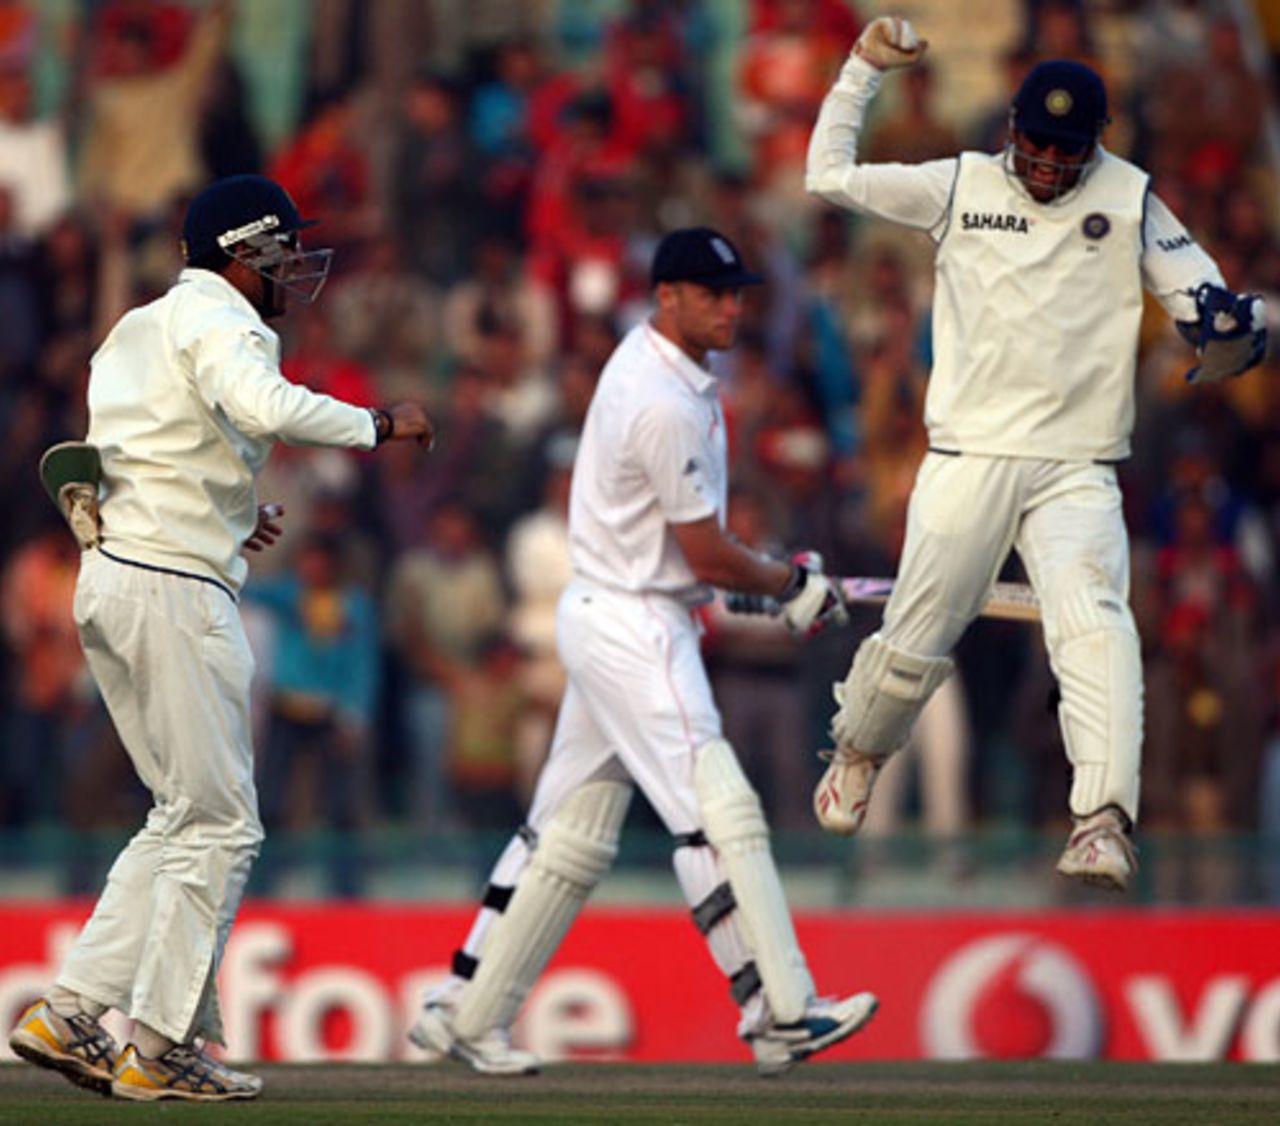 Indian players celebrate after Andrew Flintoff is caught at forward short leg, India v England, 2nd Test, Mohali, 3rd day, December 21, 2008